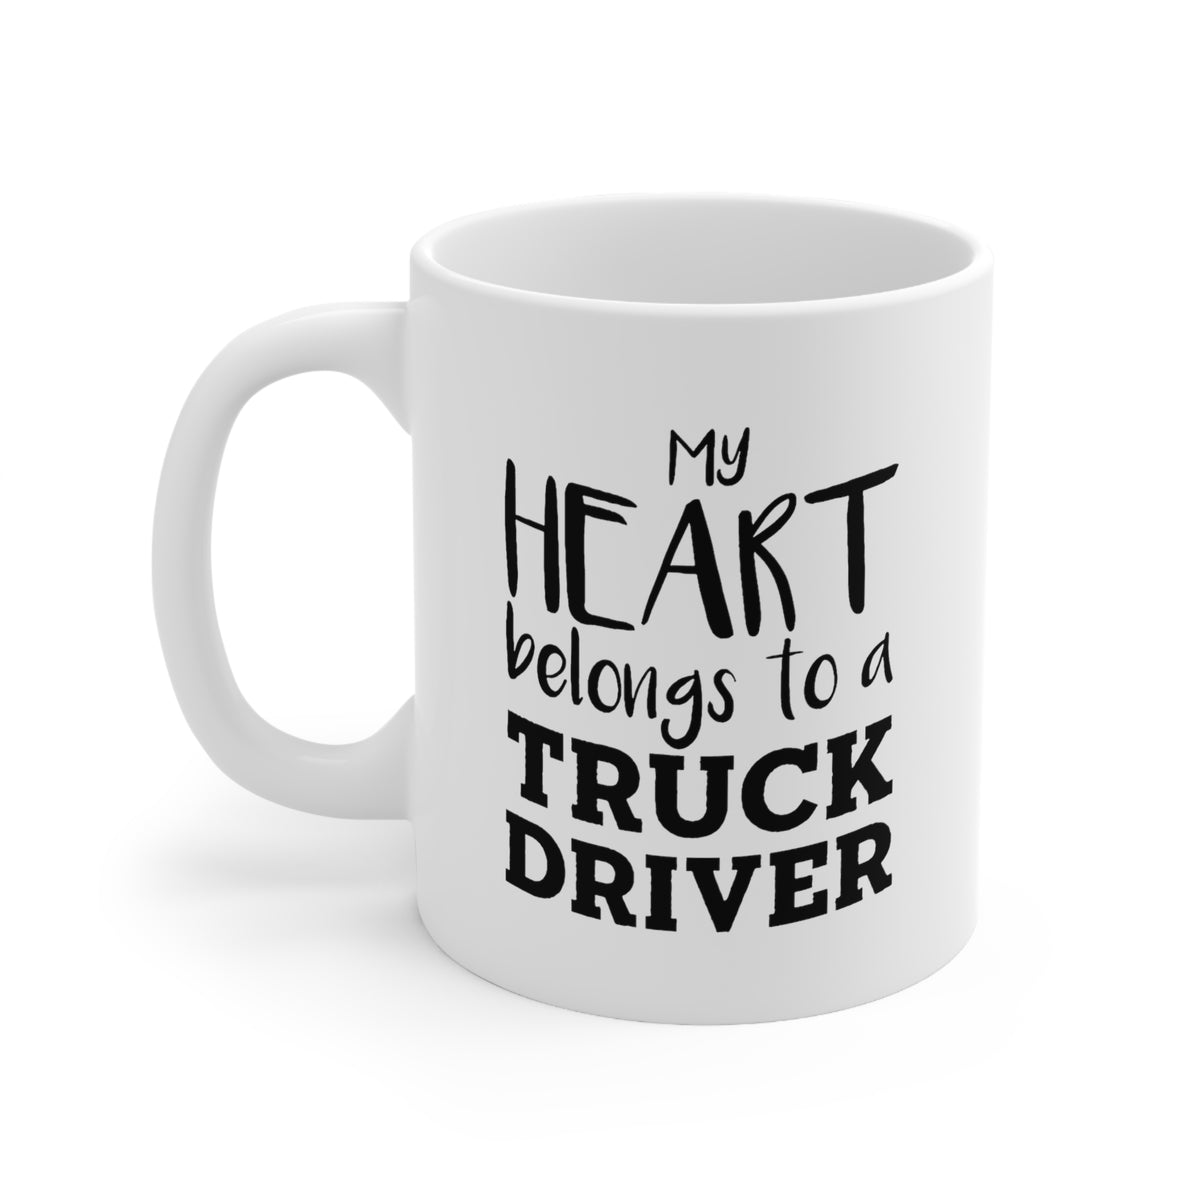 Truckers Wife Gifts - My Heart Belongs To A Truck Driver - Truckers Wife White Coffee Mug, Tea Cup